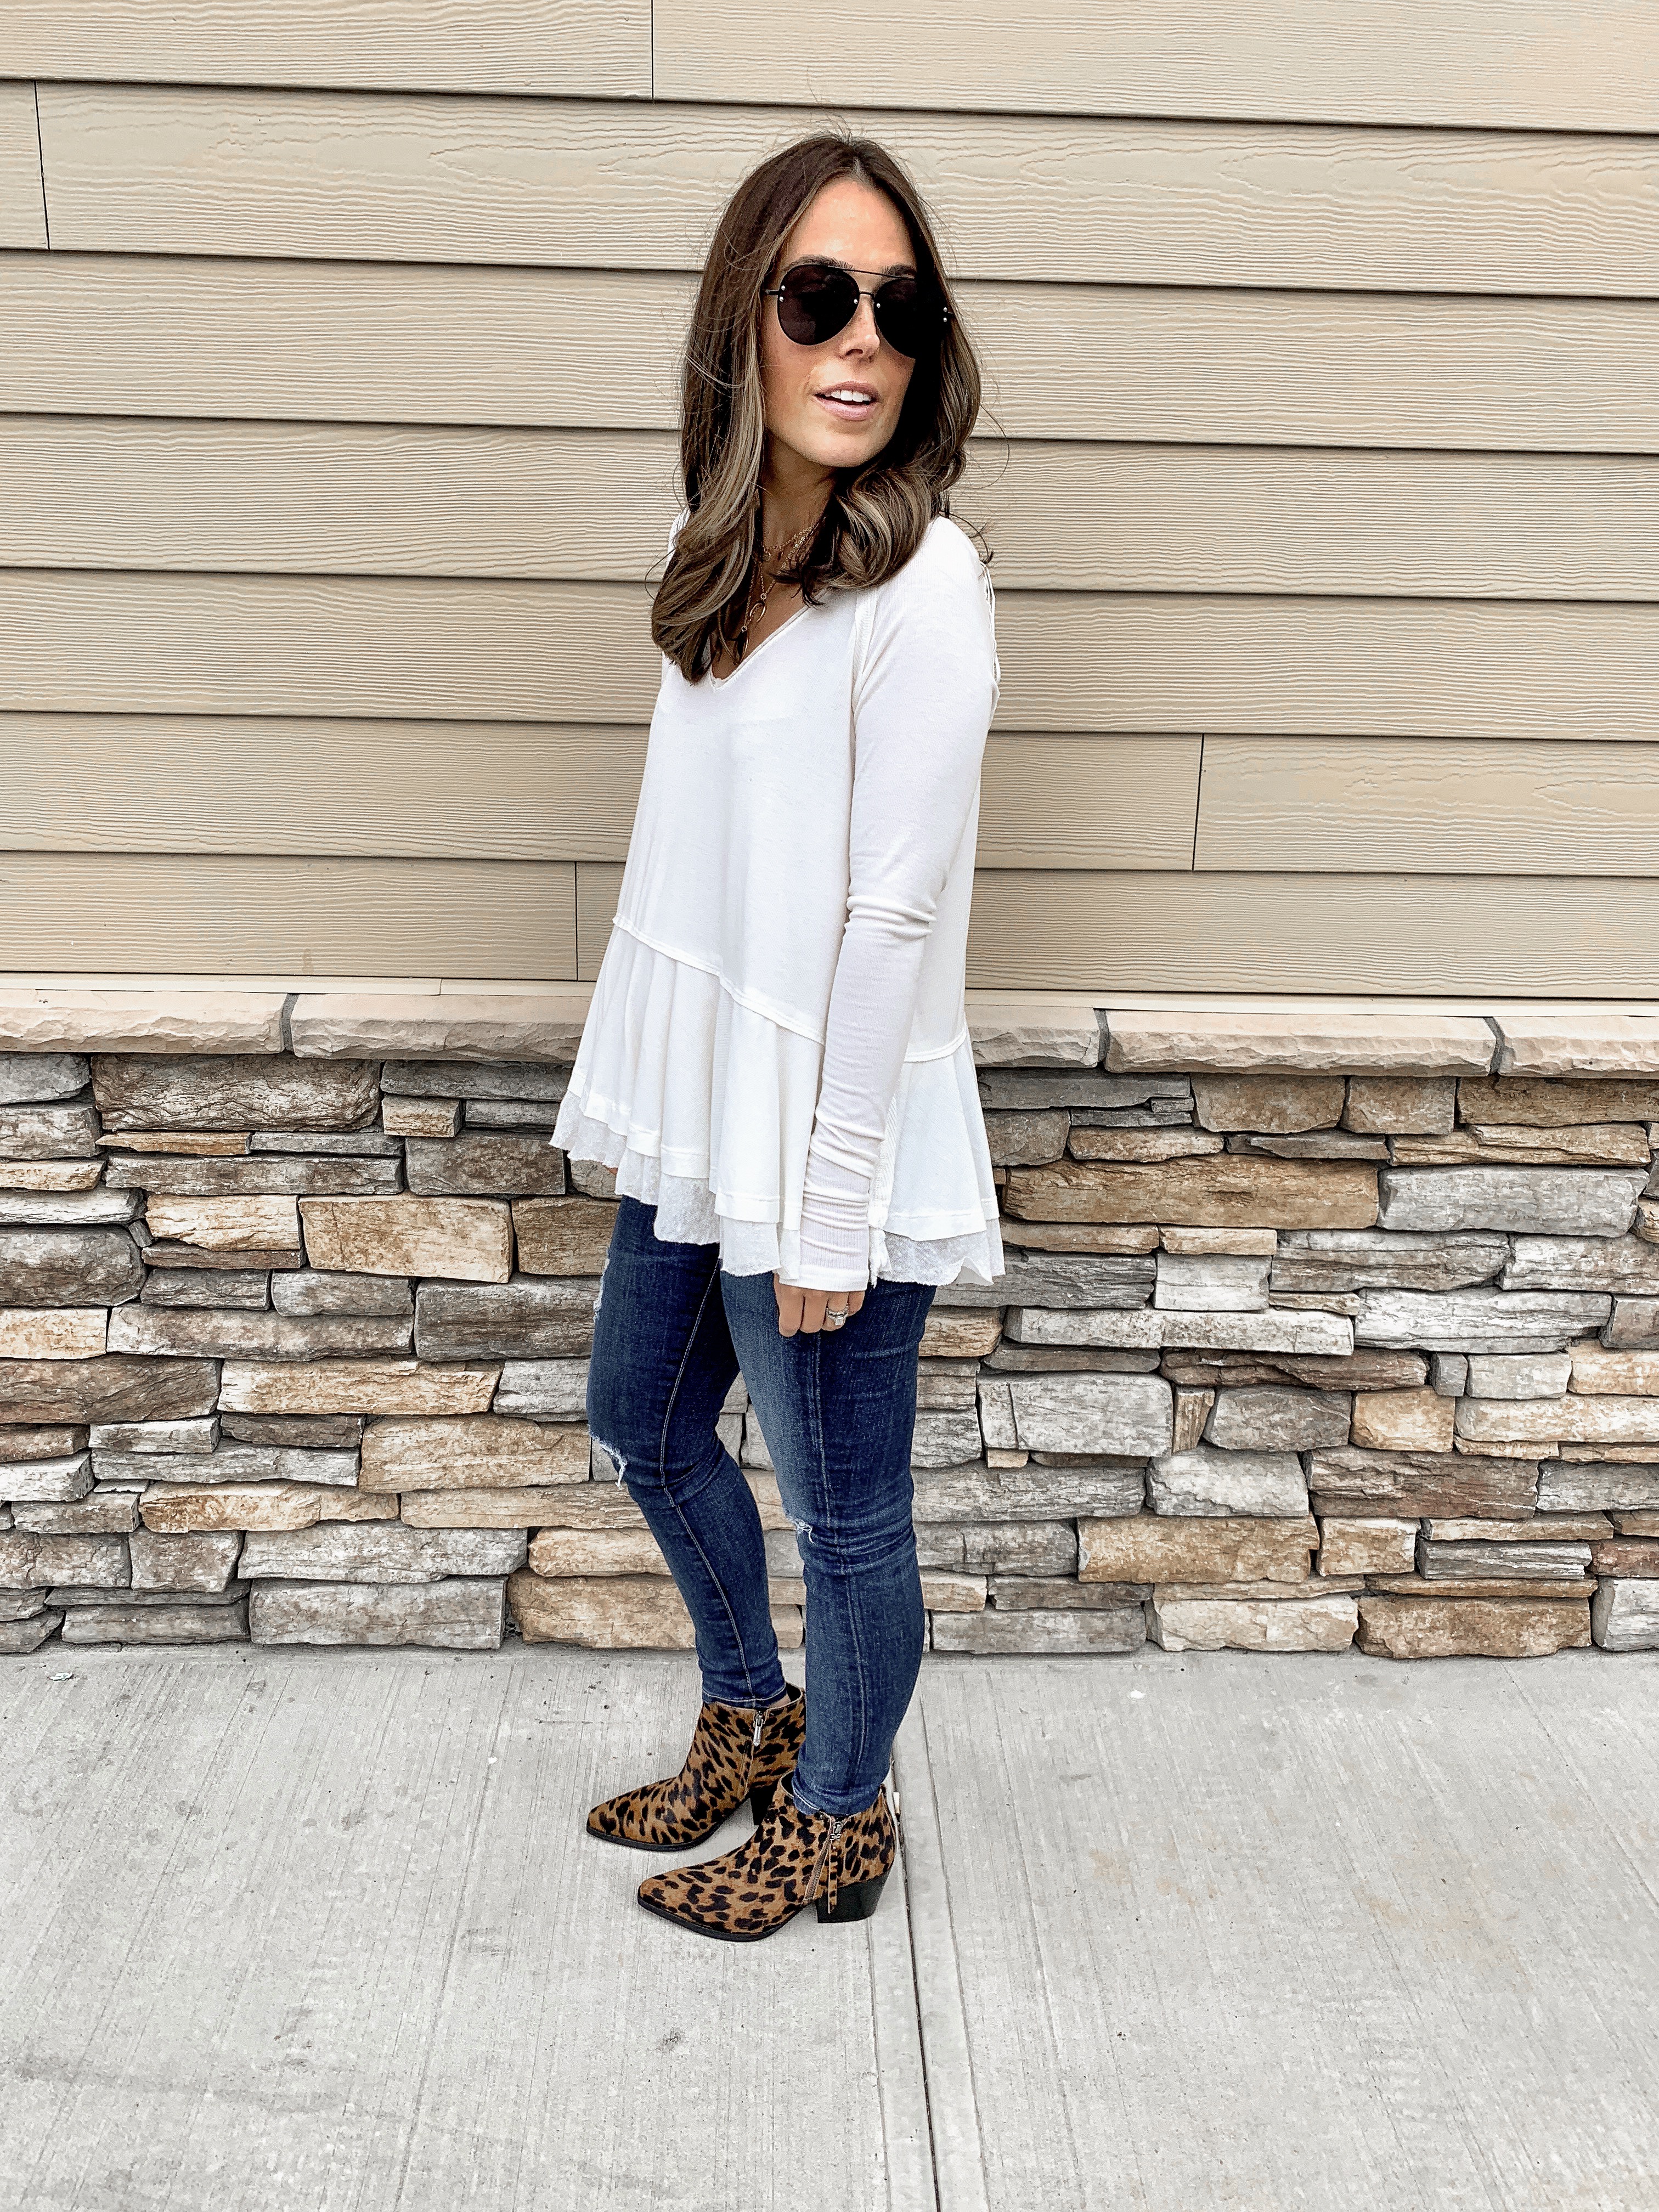 MUST-HAVE LEOPARD BOOTIES 40% OFF + AN AMAZING STEAL VS. SPLURGE + $1000  GIVEAWAY TO NORDSTROM - So Heather